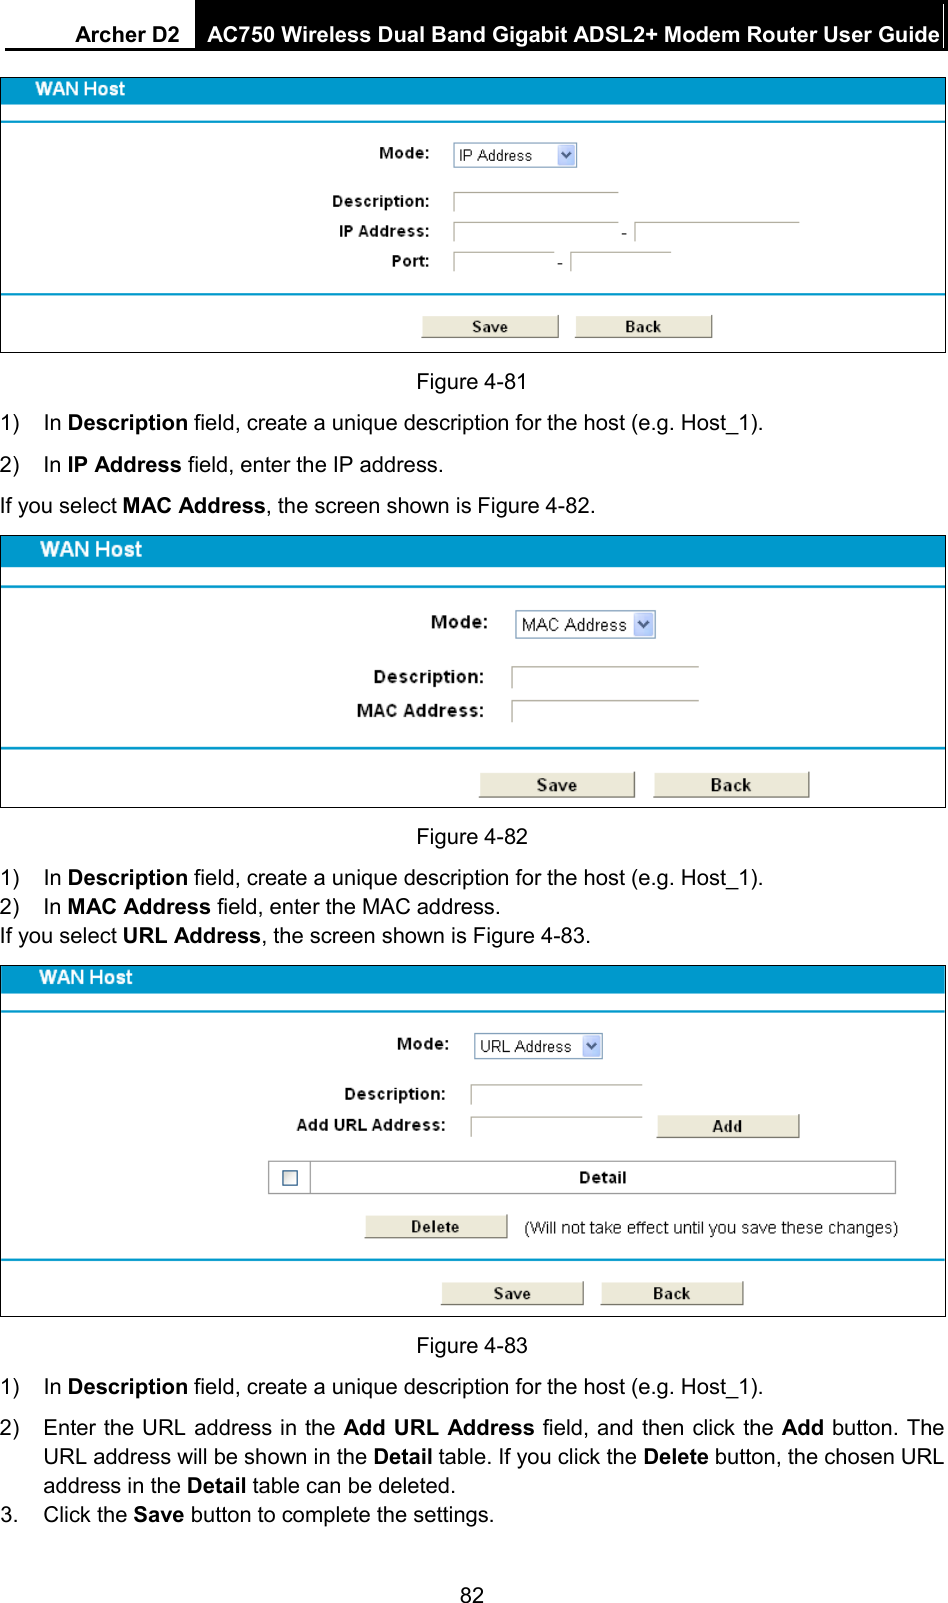 Archer D2 AC750 Wireless Dual Band Gigabit ADSL2+ Modem Router User Guide   Figure 4-81 1) In Description field, create a unique description for the host (e.g. Host_1).   2) In IP Address field, enter the IP address. If you select MAC Address, the screen shown is Figure 4-82.  Figure 4-82 1) In Description field, create a unique description for the host (e.g. Host_1).   2) In MAC Address field, enter the MAC address. If you select URL Address, the screen shown is Figure 4-83.  Figure 4-83 1) In Description field, create a unique description for the host (e.g. Host_1). 2)  Enter the URL address in the Add URL Address field, and then click the Add button. The URL address will be shown in the Detail table. If you click the Delete button, the chosen URL address in the Detail table can be deleted. 3. Click the Save button to complete the settings. 82 